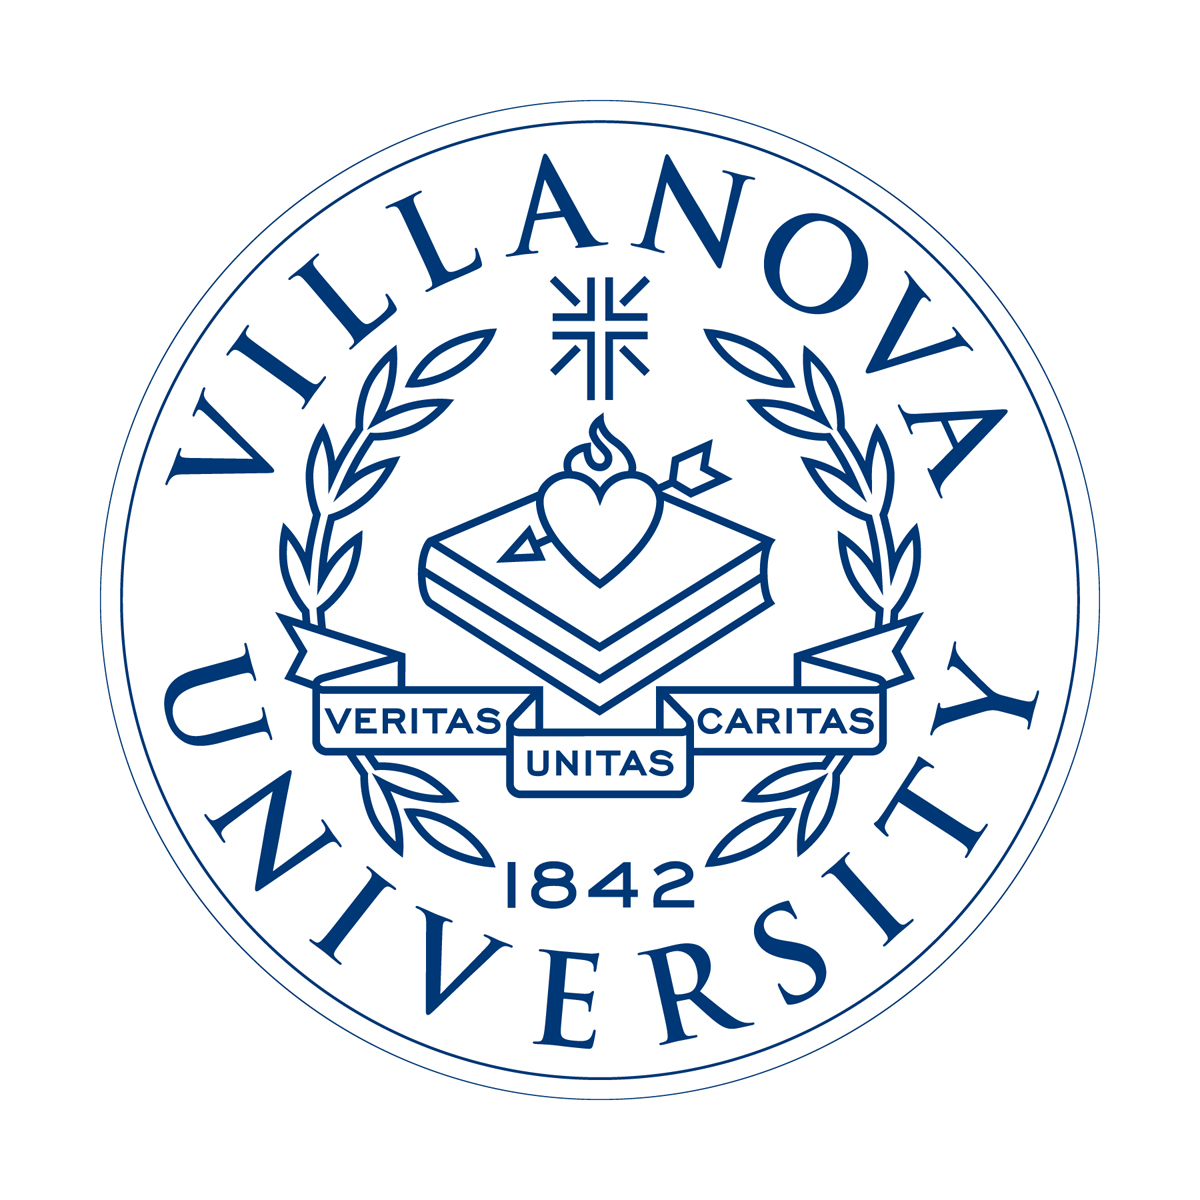 Villanova University announces the election of two new members to its Board of Trustees.